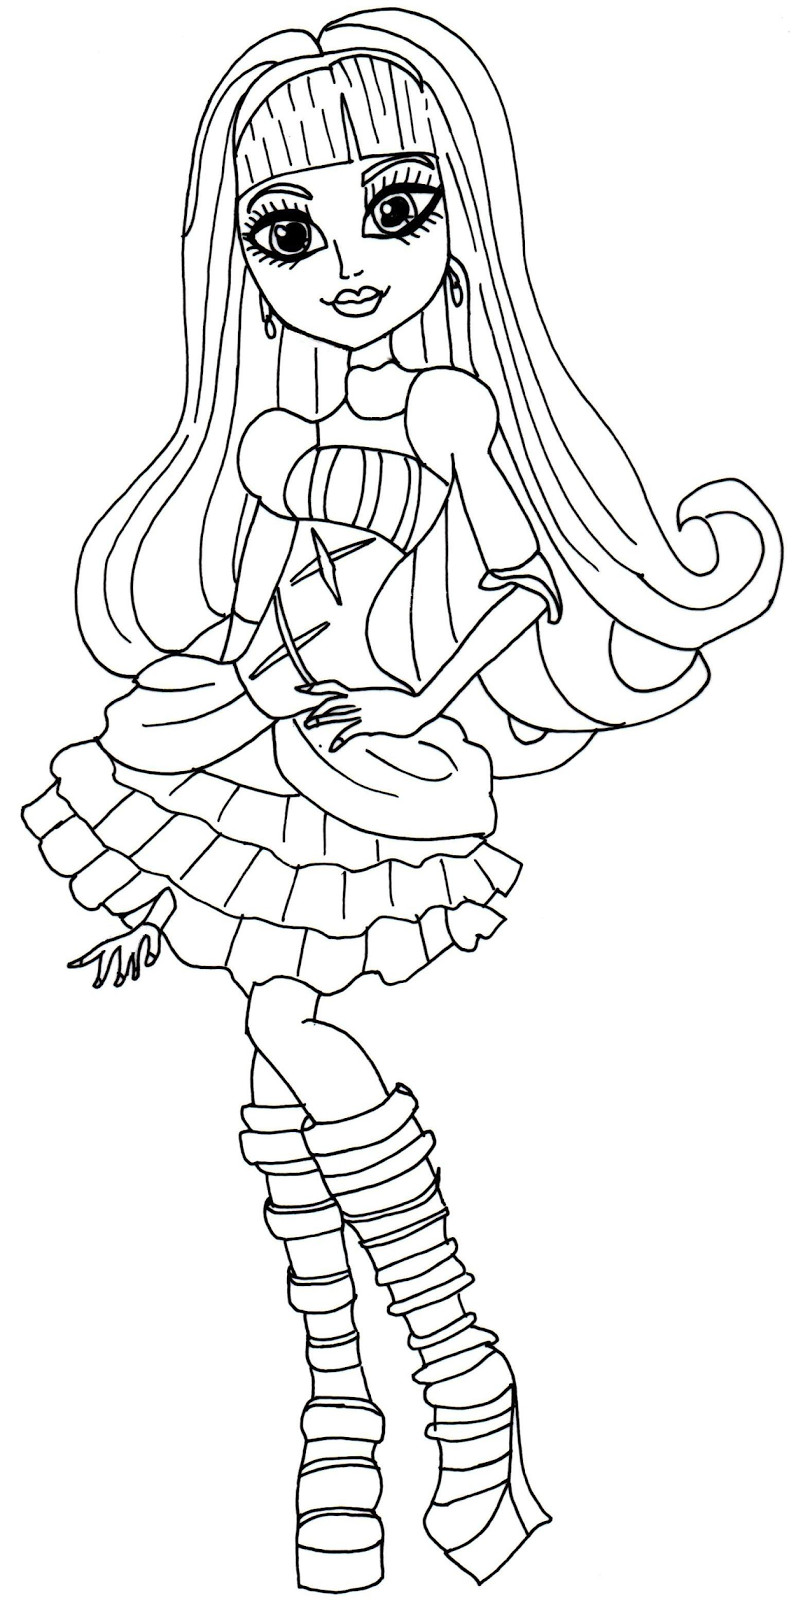 Free Printable Monster High Coloring Pages
 Free Printable Monster High Coloring Pages December 2013